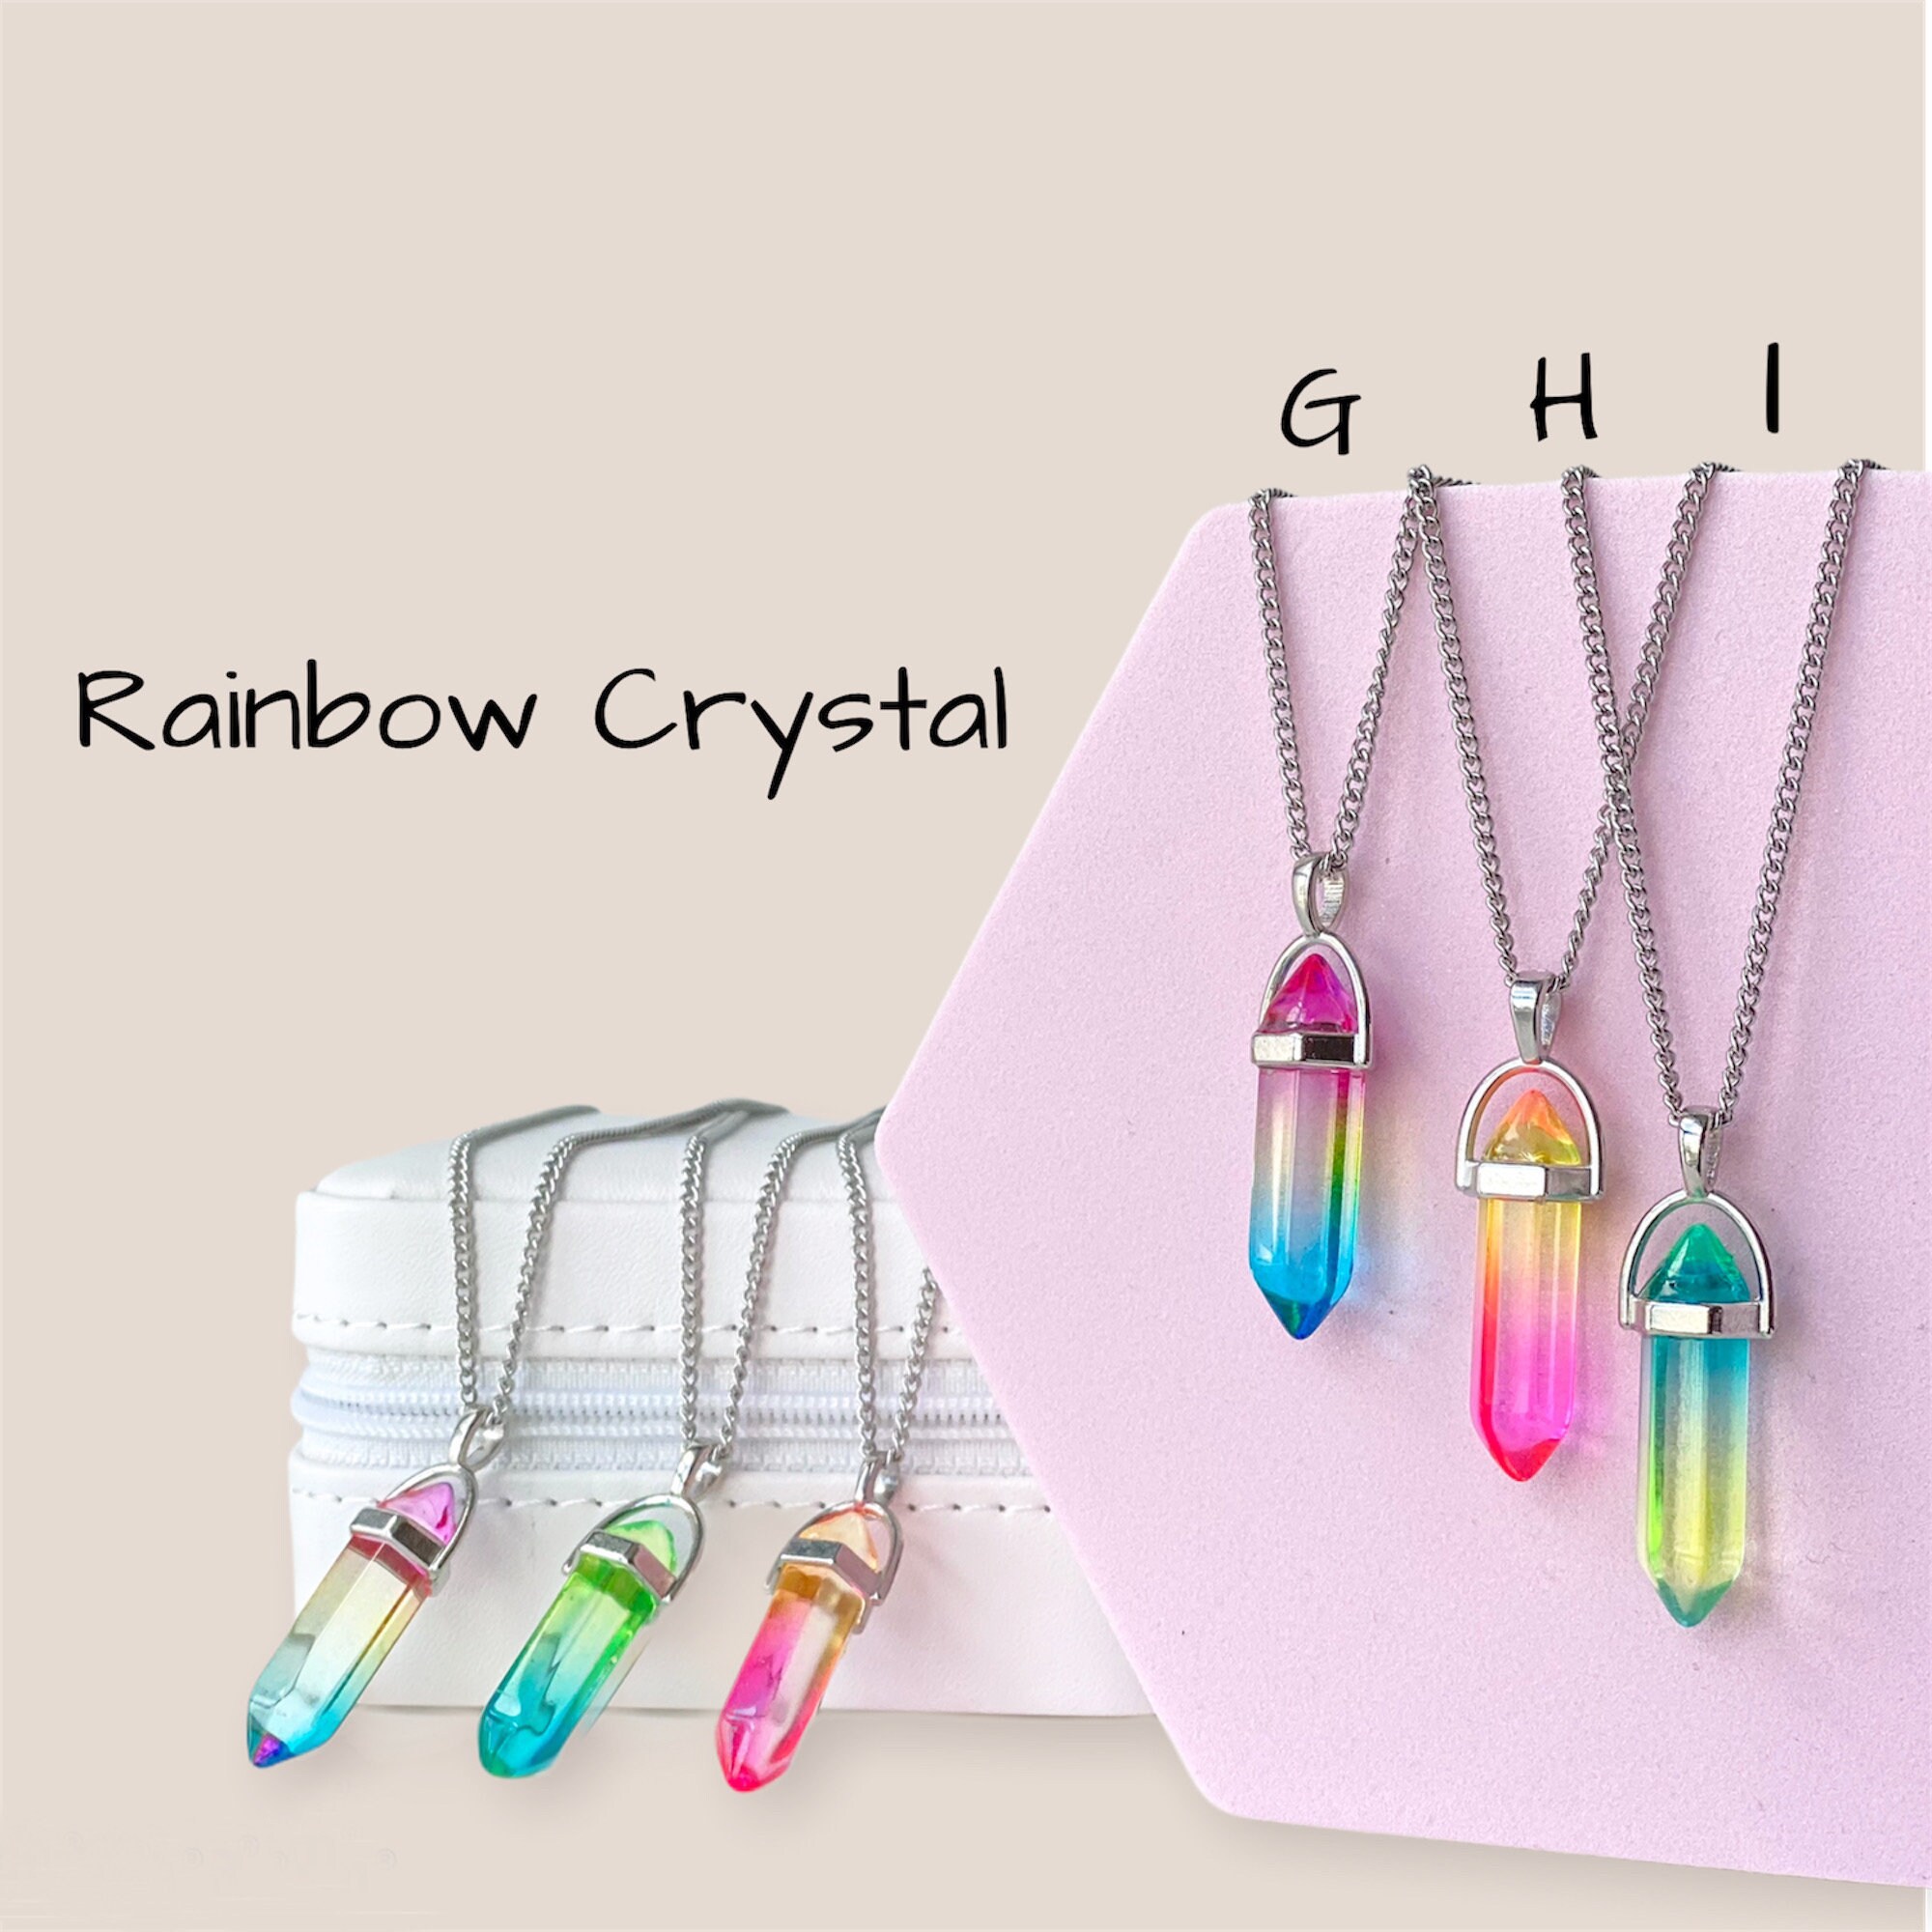 925 Sterling Silver Gemstone Pencil Pendant, Crystal Healing Necklace  Jewellery at Rs 750 | Jaipur | ID: 21241995030